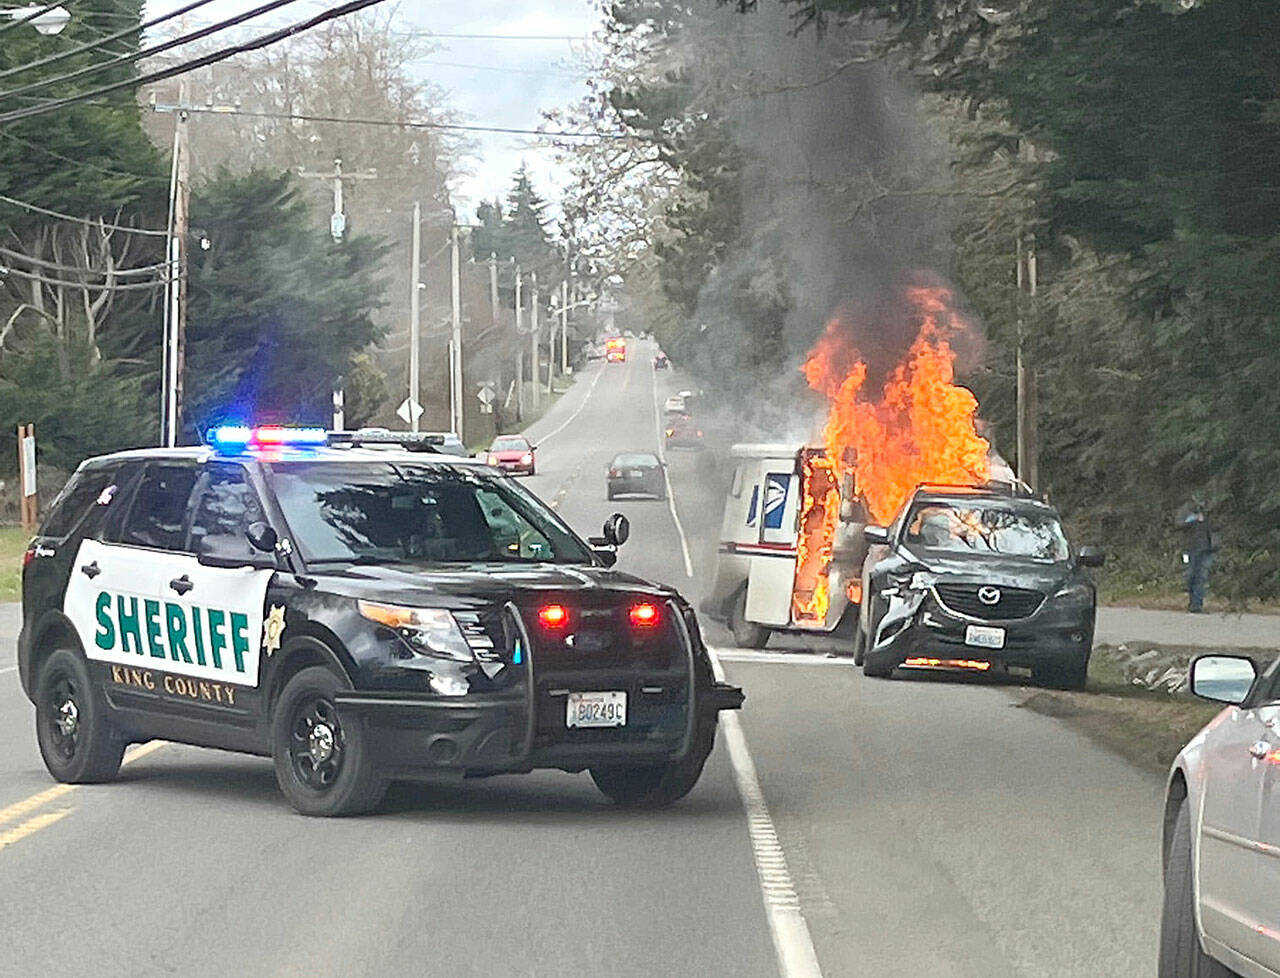 (Daralyn Anderson Photo) The accident took place at 188th Street and Vashon Highway, on Wednesday, Feb. 16 .